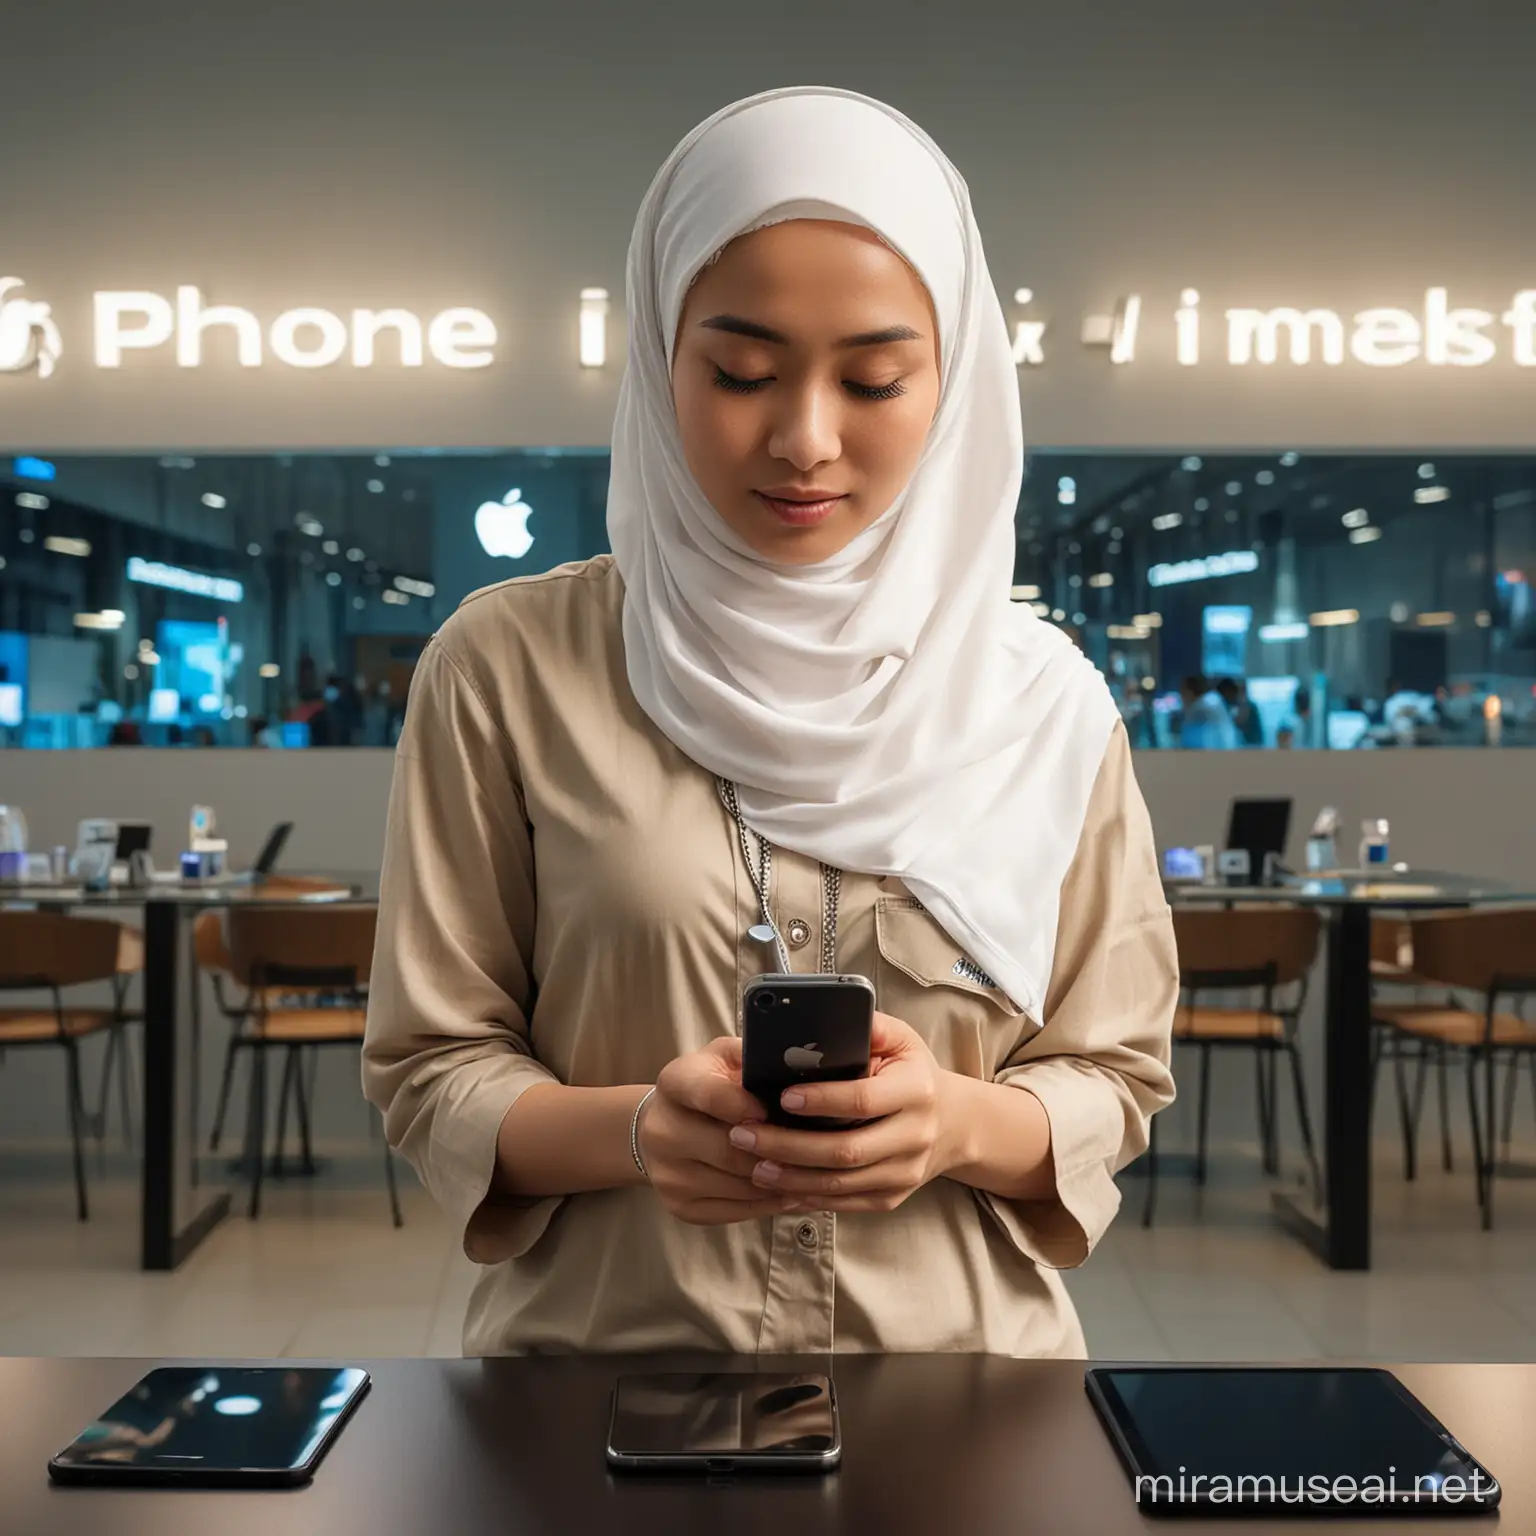 Stylish Indonesian Woman Representing iPhone Indonesia at Retail Desk